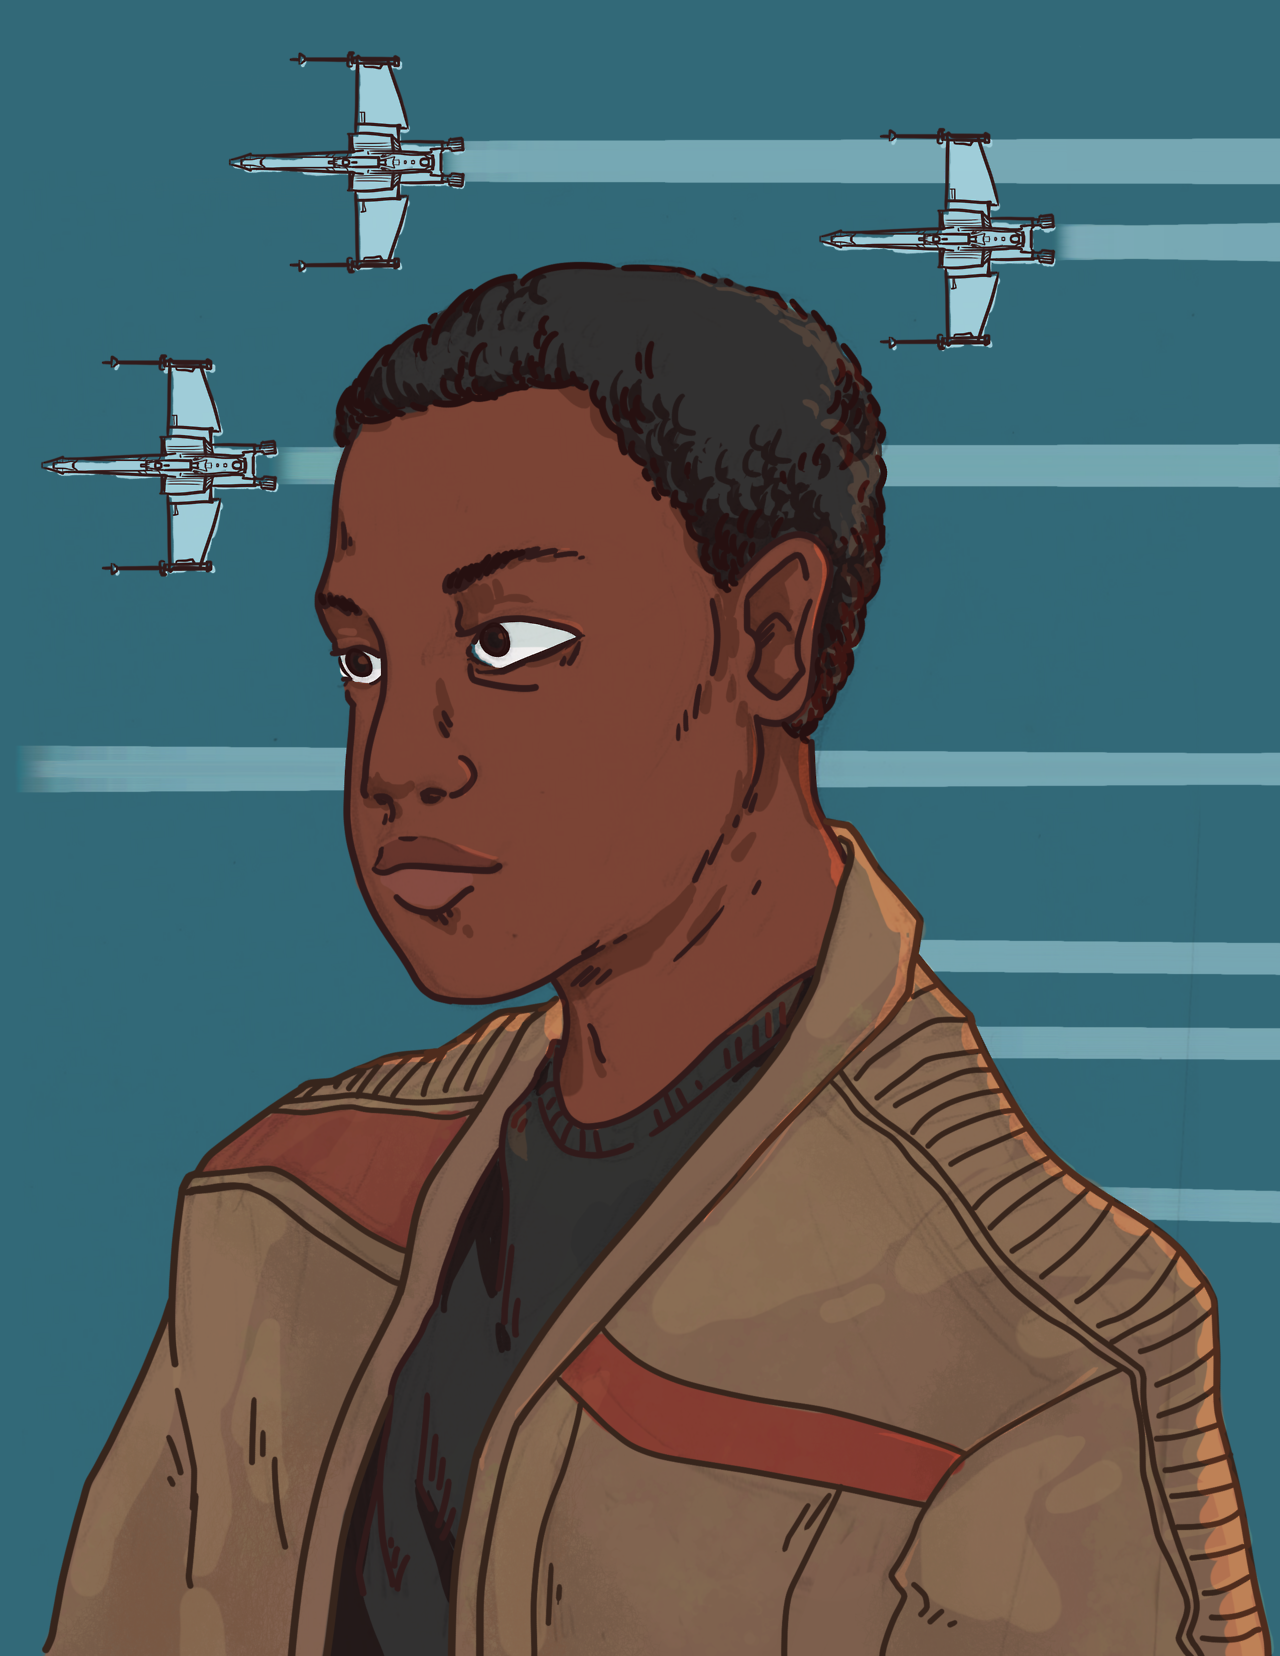 A portrait of John Boyega as Finn. He looks left out of frame. 3 X-wings fly to the left behind him.